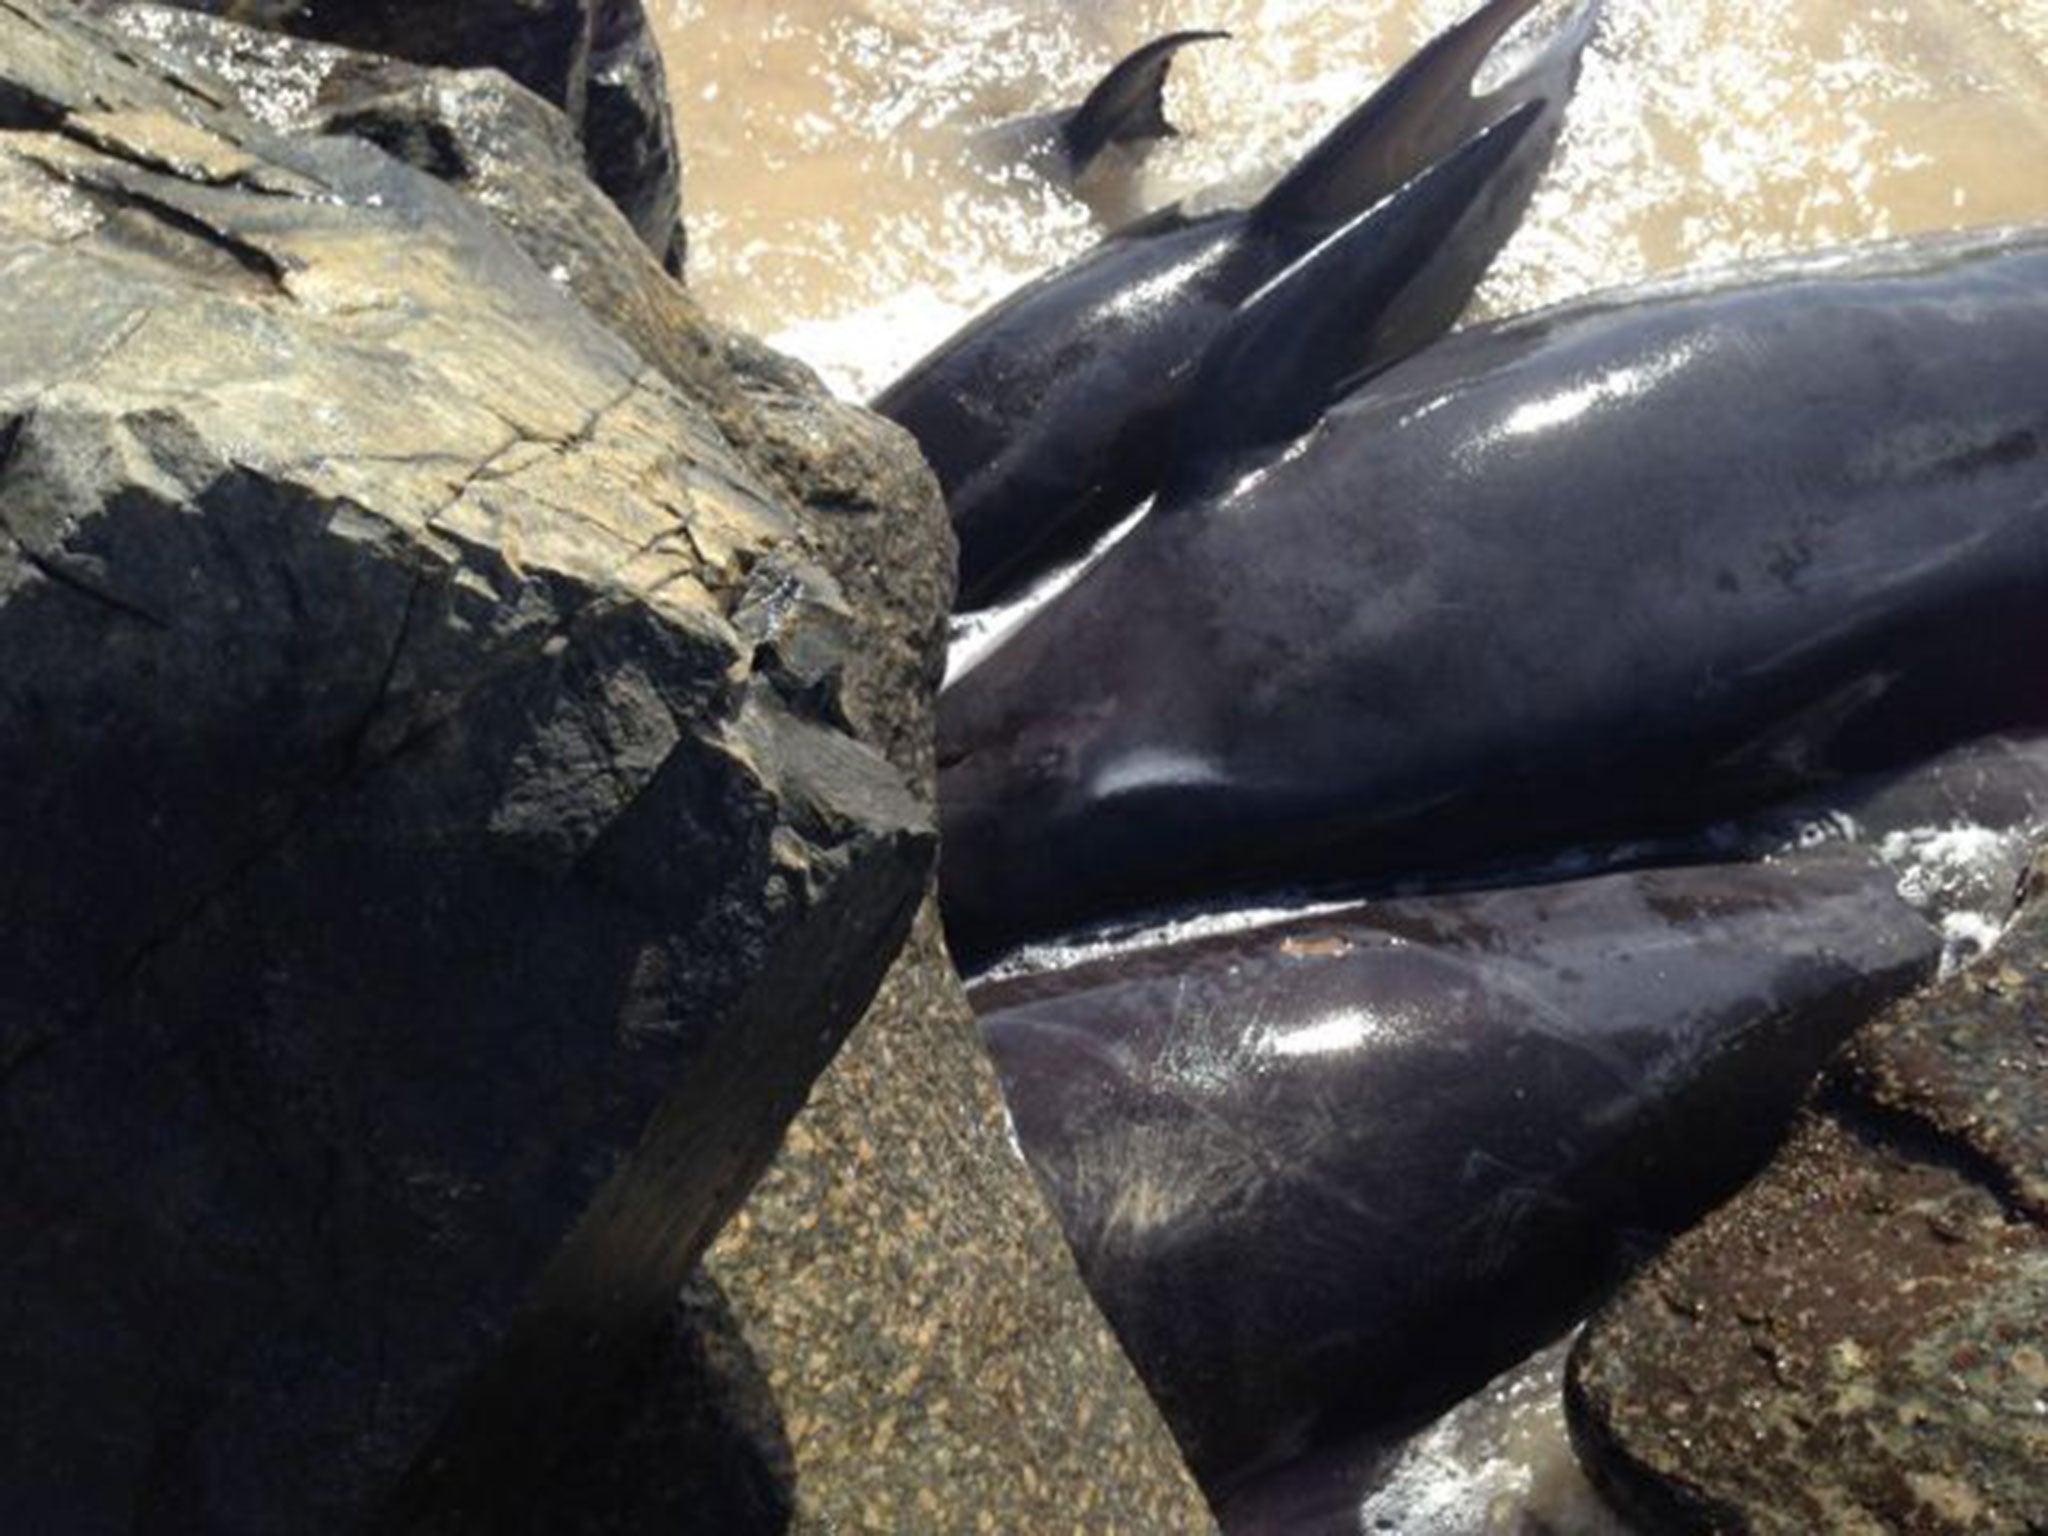 Three of the 12 whales that became stranded on Monday